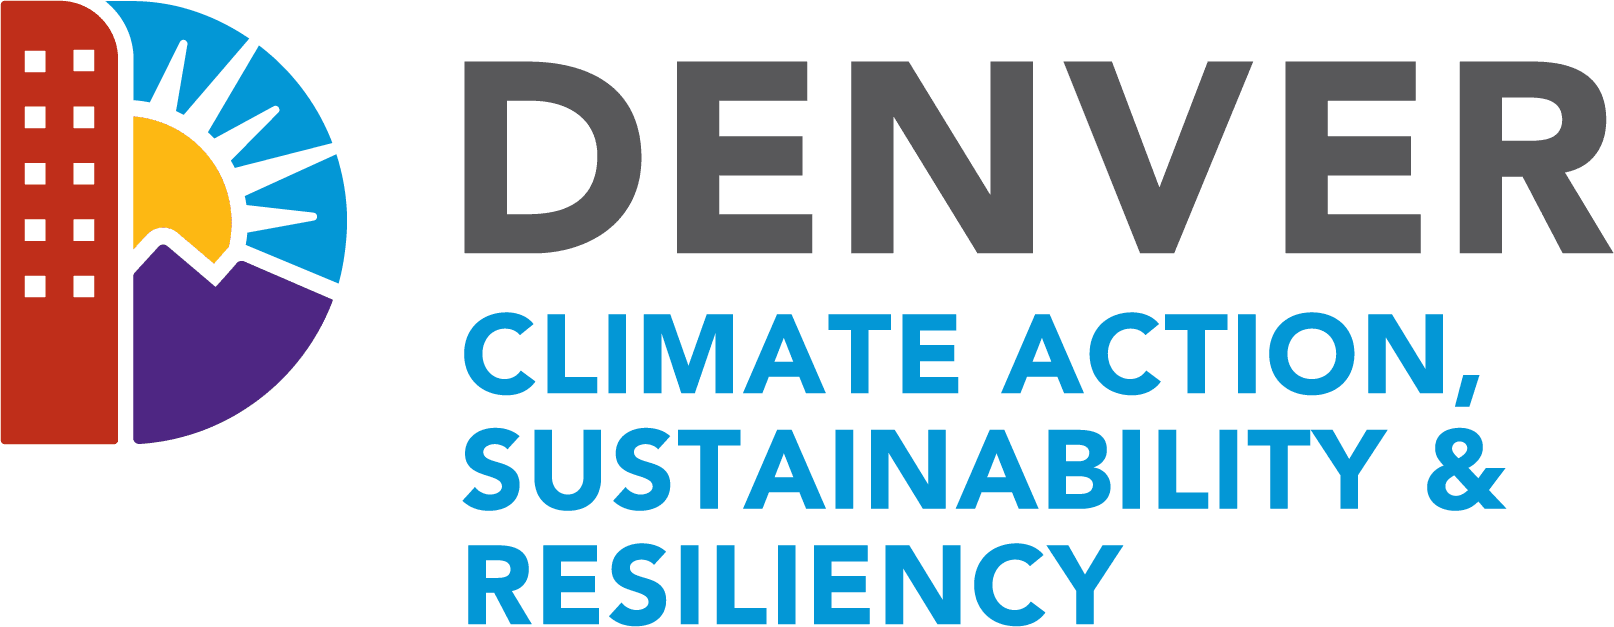 Sponsor - 1 Climate Action Sustainability Resiliency 4C 2